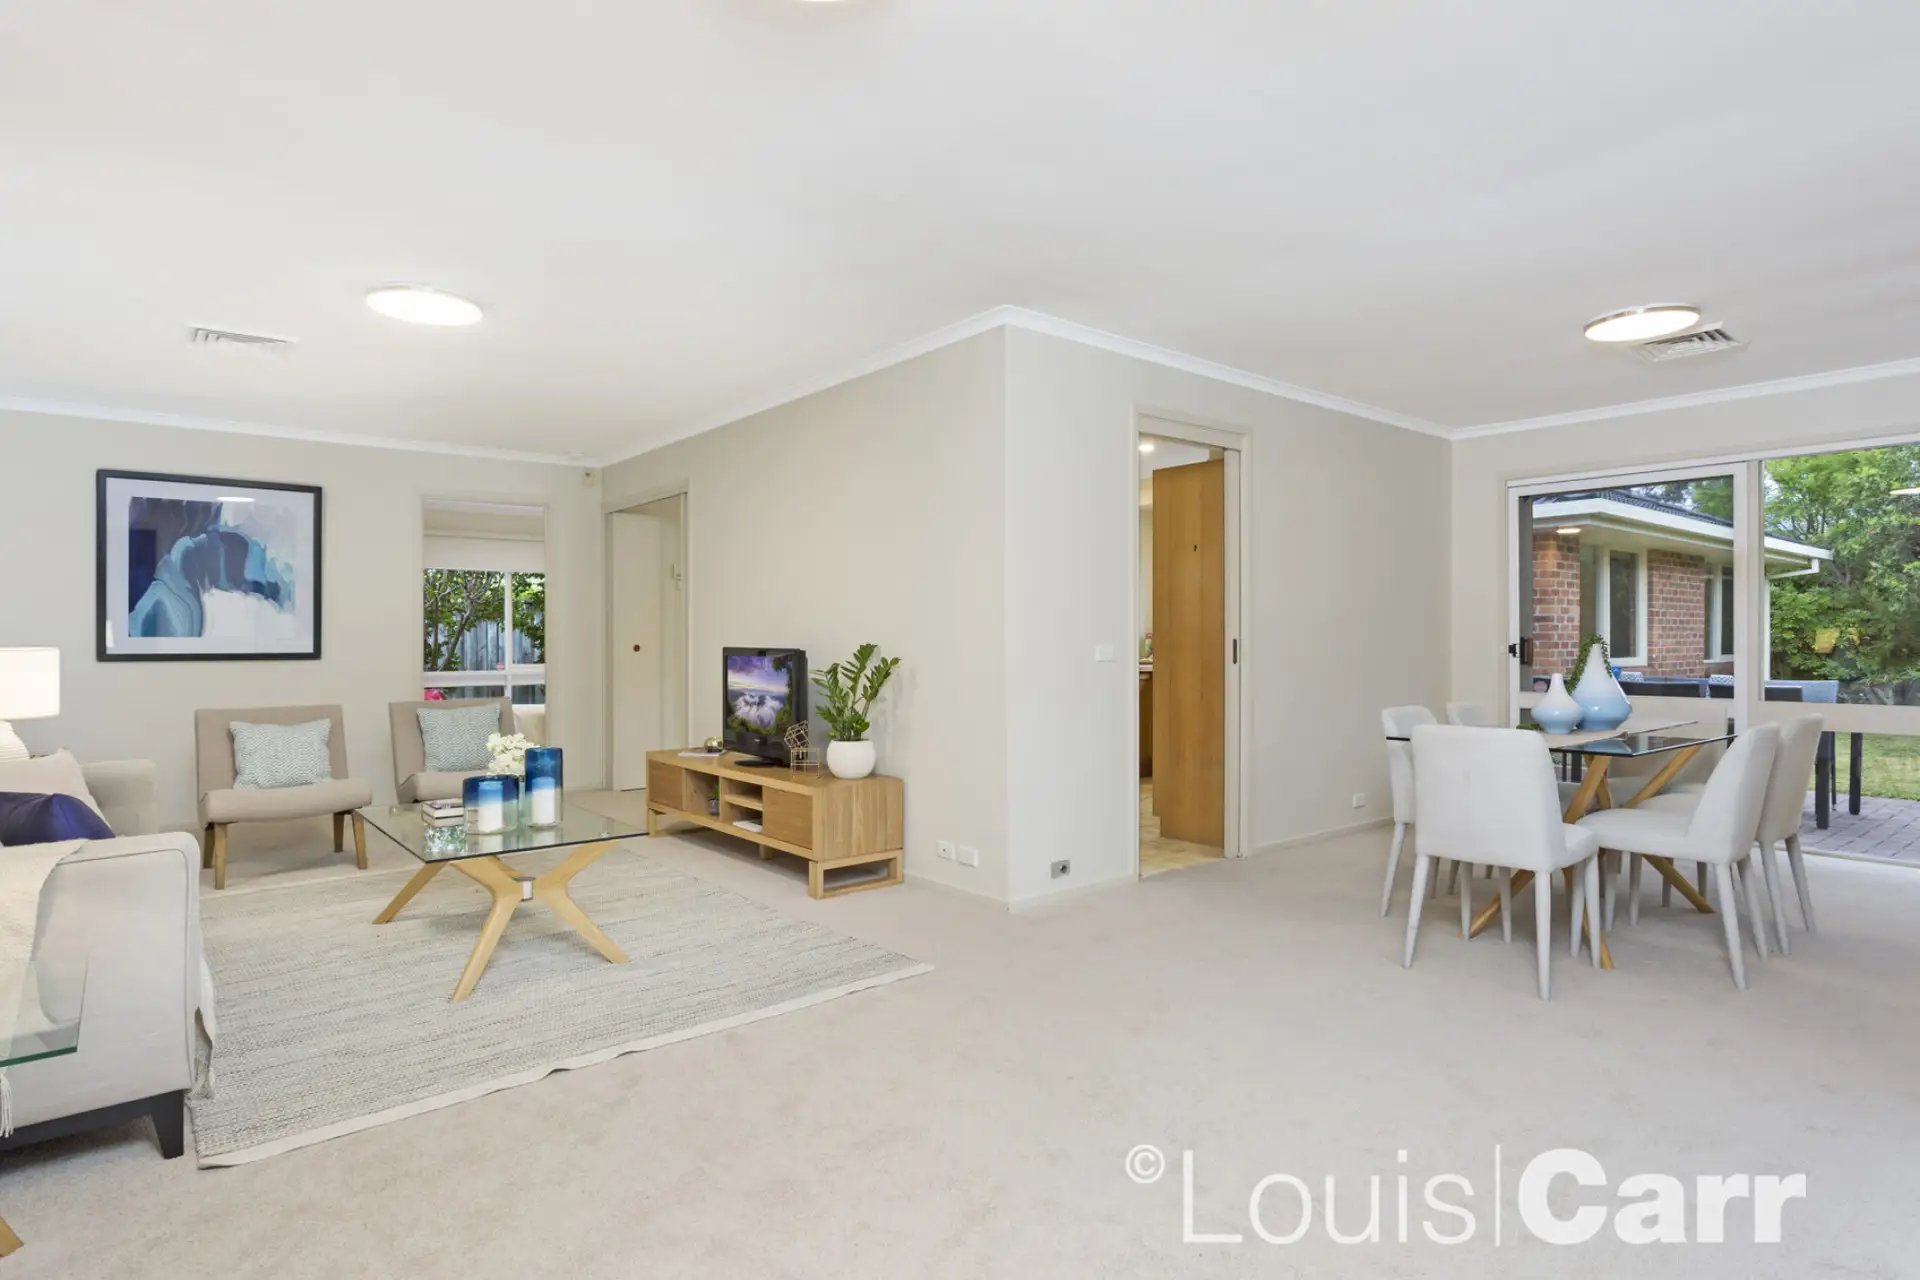 Photo #2: 9 Pogson Drive, Cherrybrook - Sold by Louis Carr Real Estate